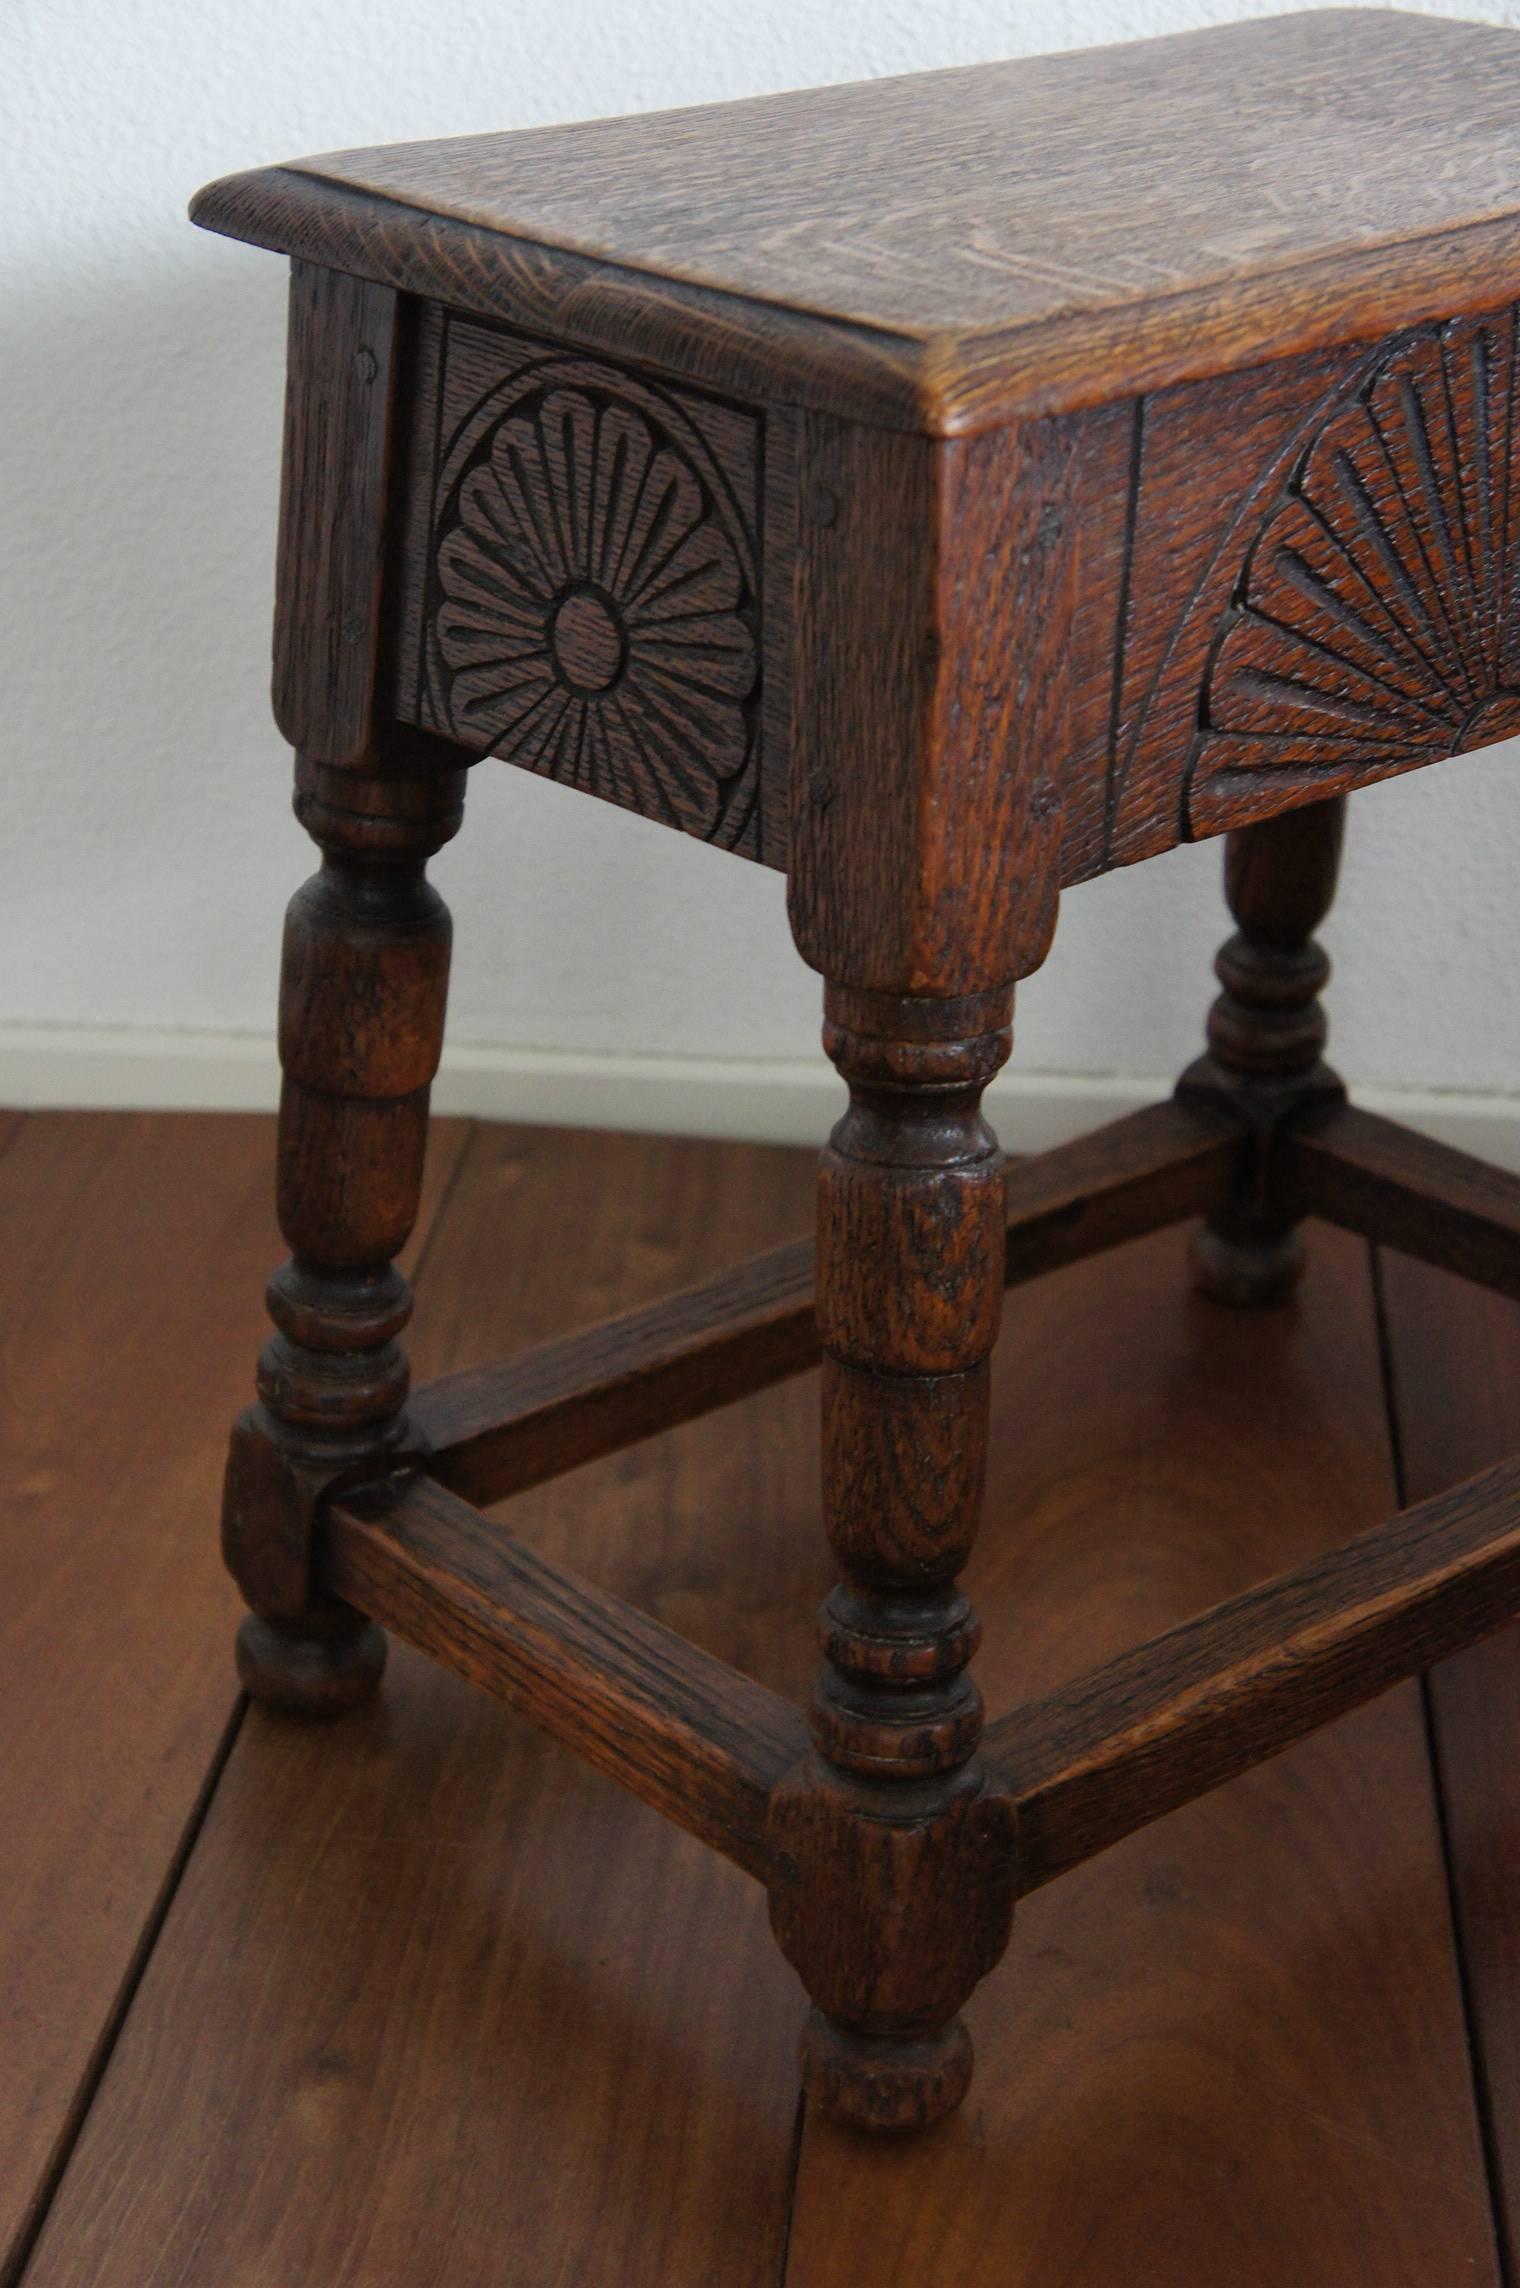 Great joint stool with beautiful patina and carved pattern.

This handcrafted Joint stool is both rustic and stylish. It is an absolute joy to watch and to sit on. It is as stable as the day it was hand-crafted. In our longing for reliable and